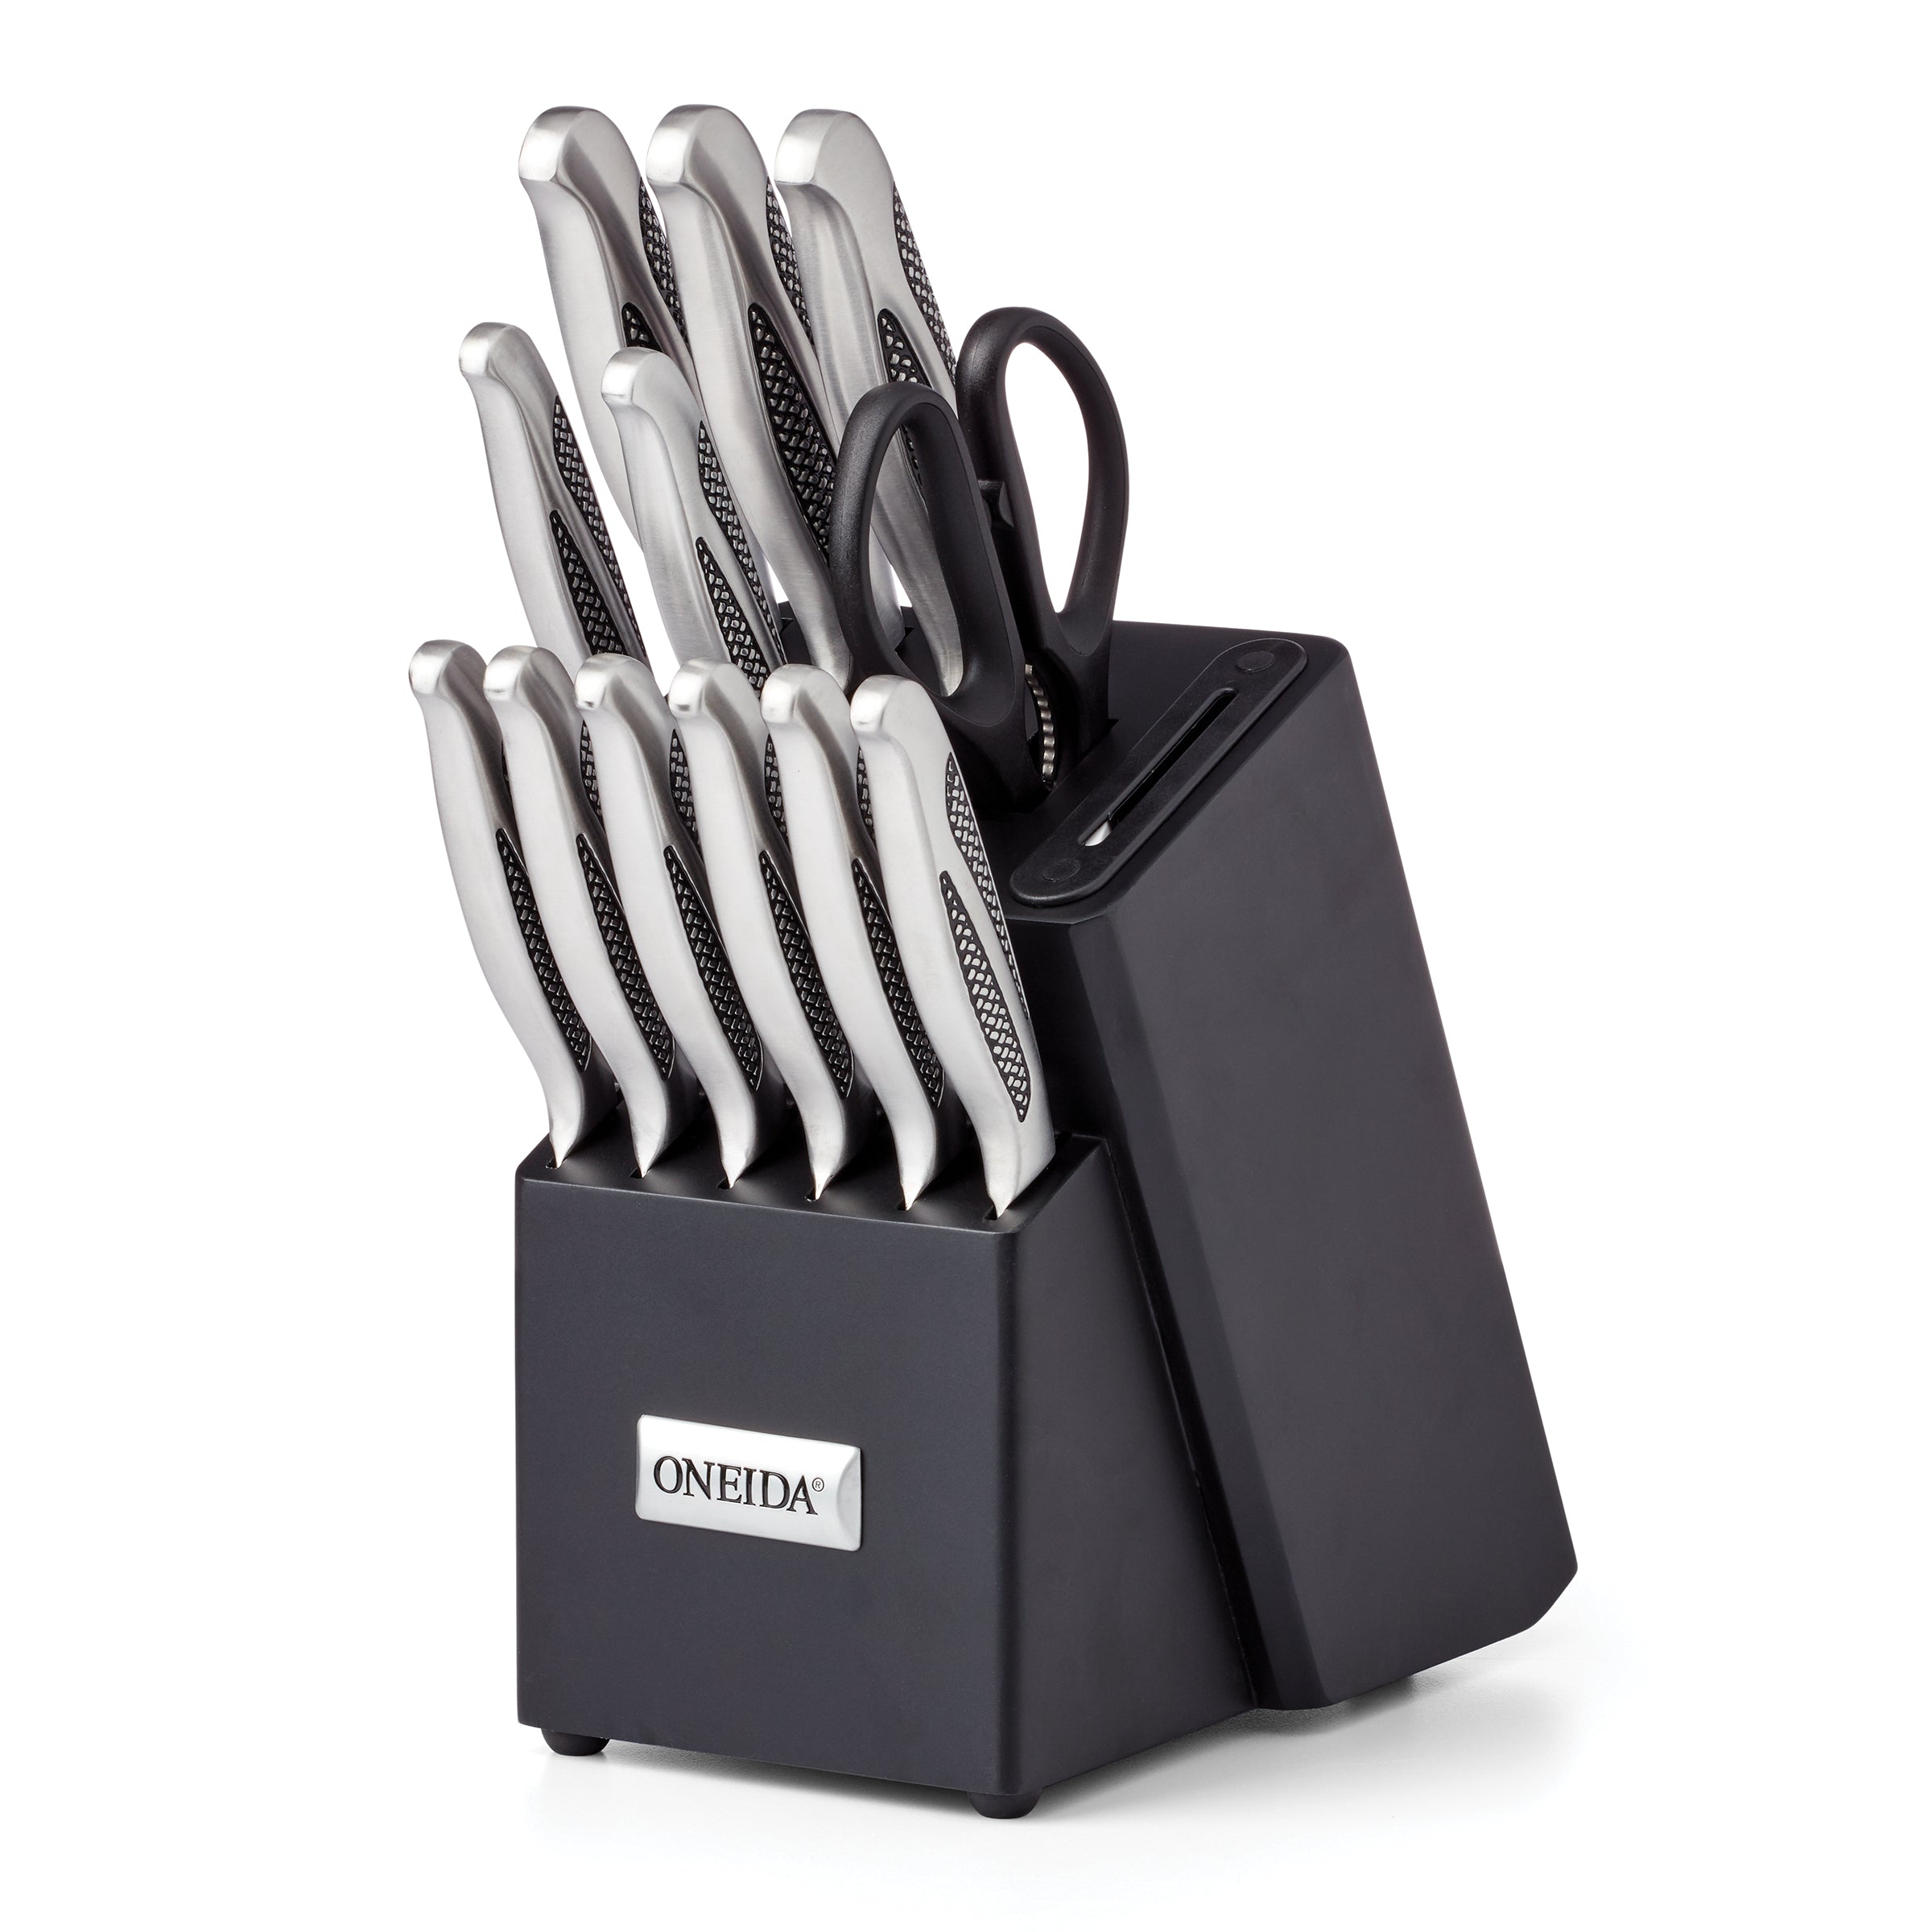 This 14-piece knife set with a built-in sharpener cuts everything